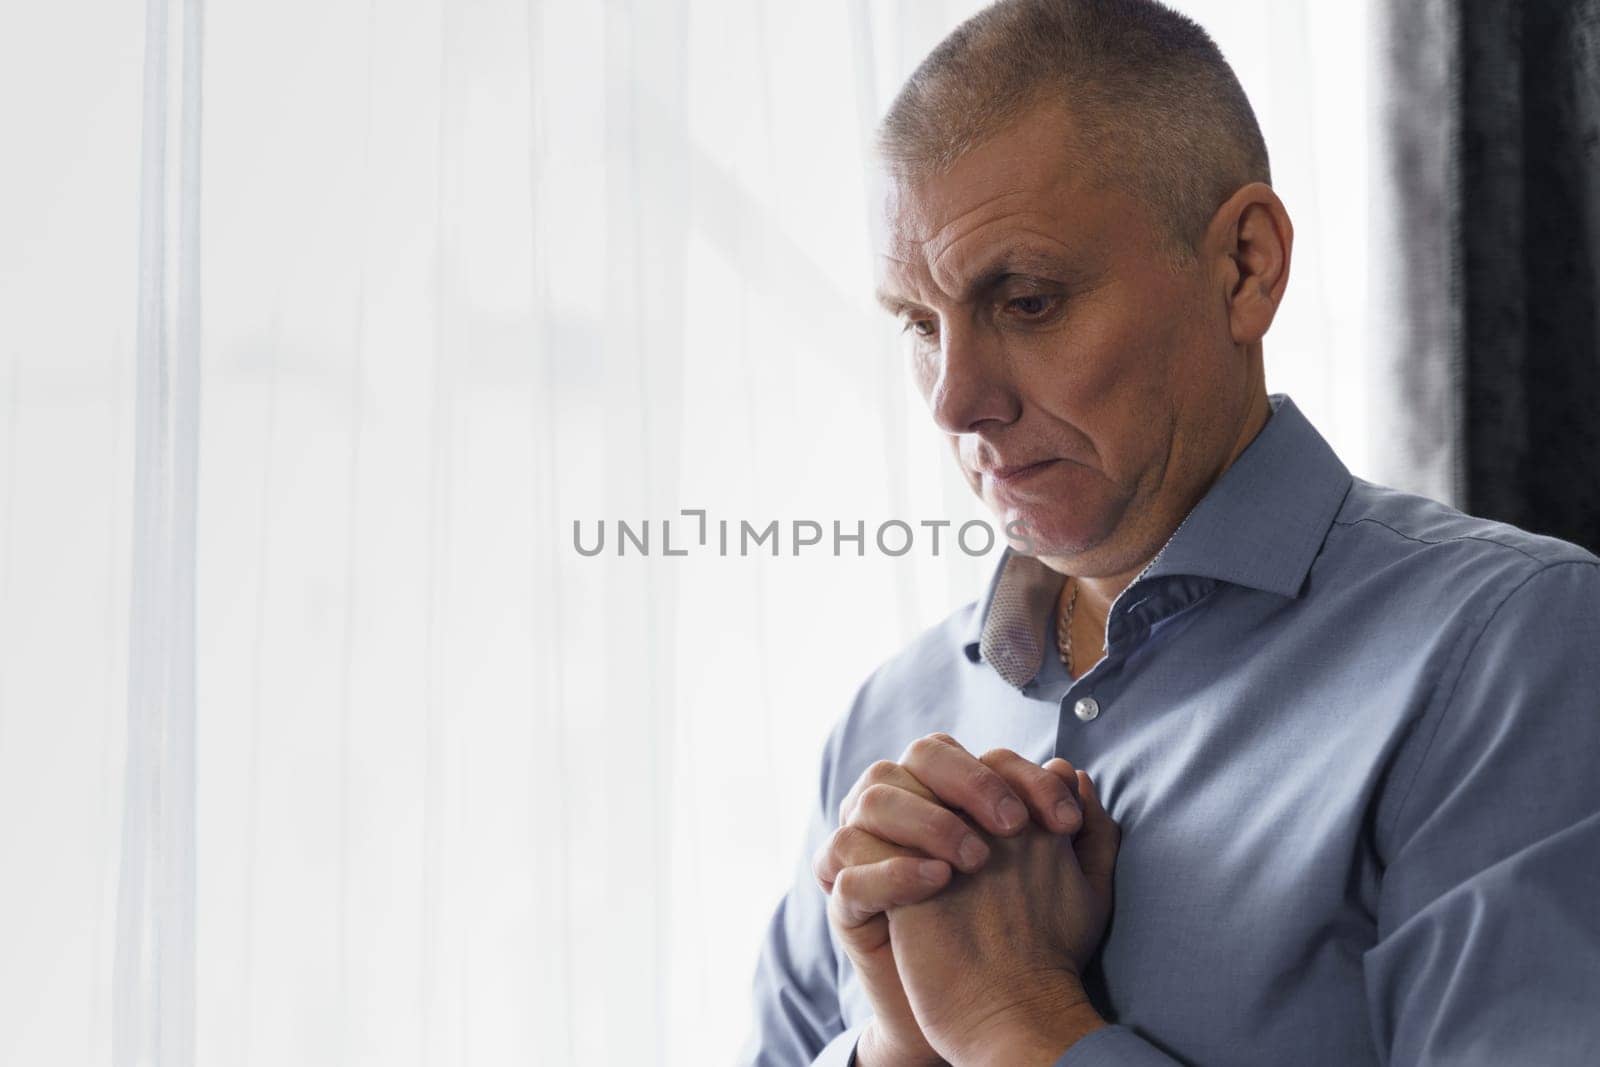 Portrait of a man who stands at the window clenched his hands in front of him, concentrated, prays or thinks. Side view.